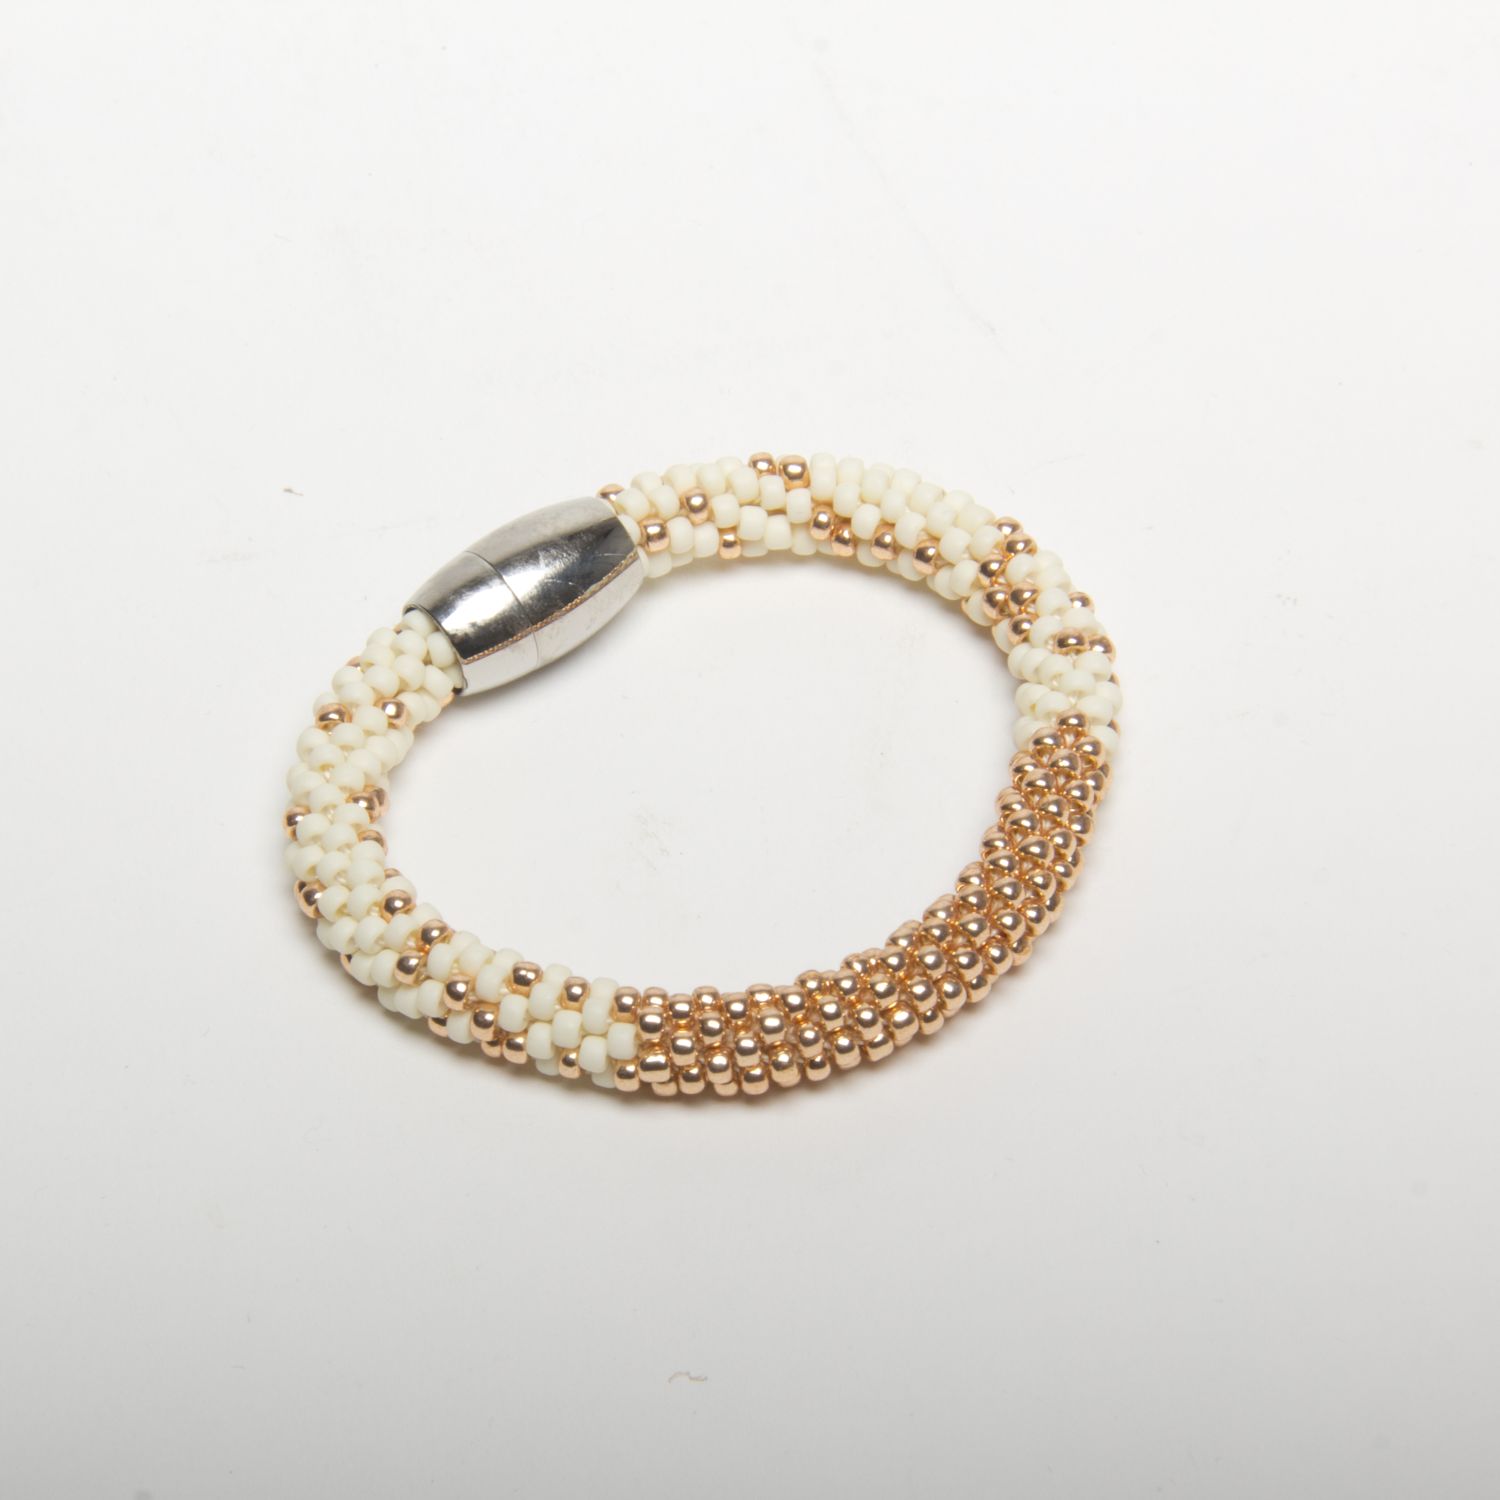 Jill Cribbin: Stardust Bracelet in Cream with Rose Gold Product Image 2 of 2